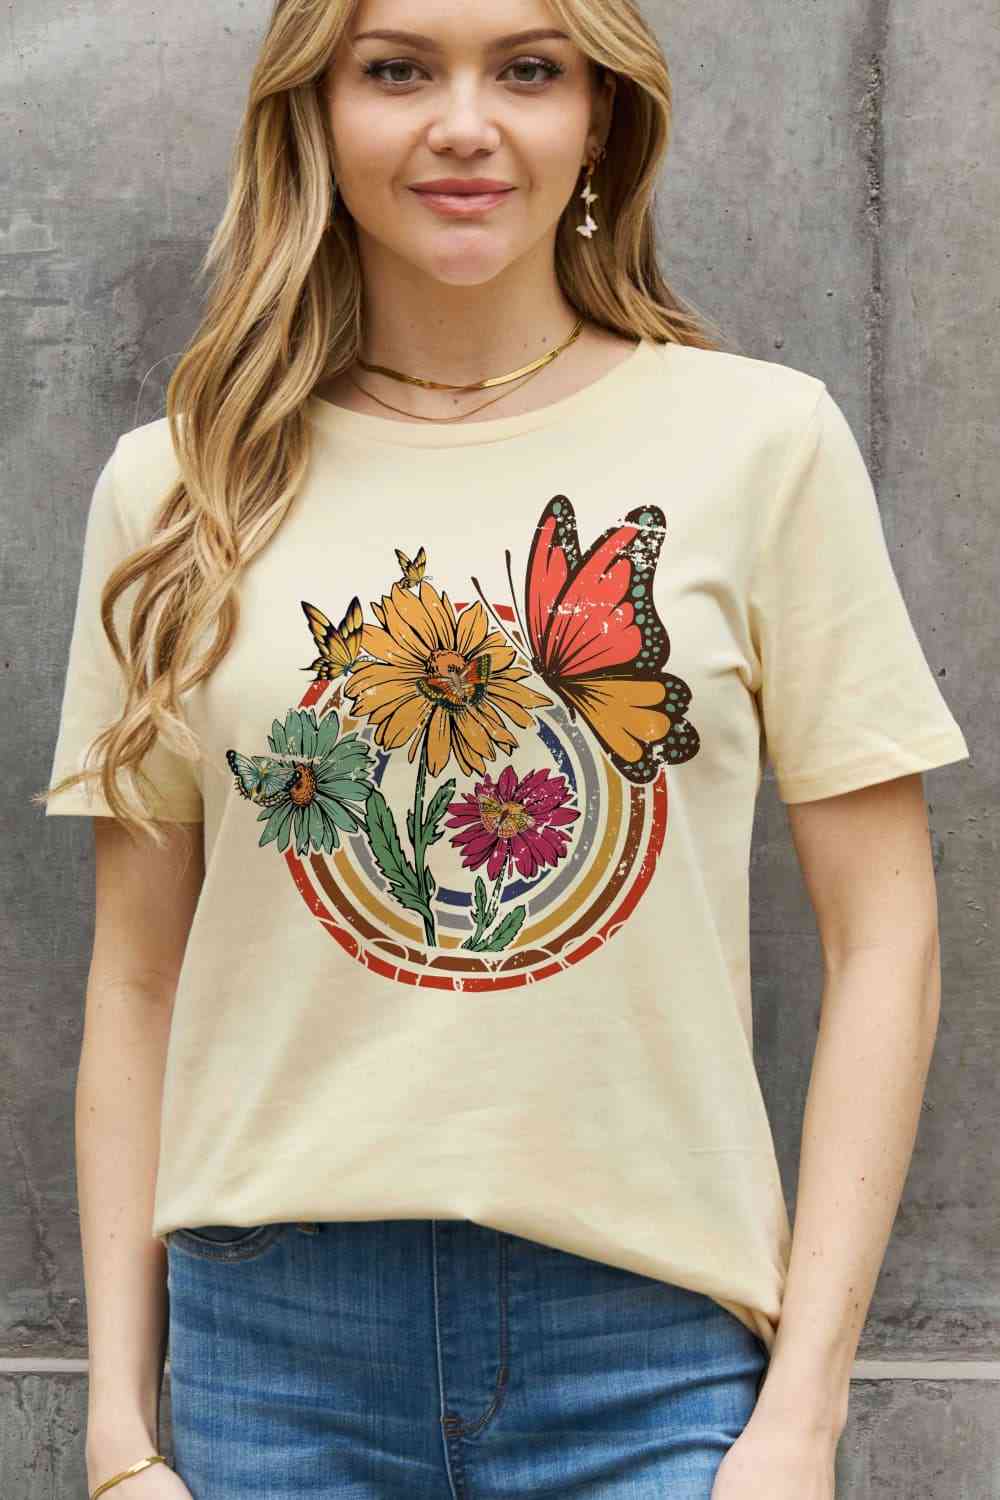 Flower & Butterfly Graphic Cotton Tee - T-Shirts - Shirts & Tops - 16 - 2024